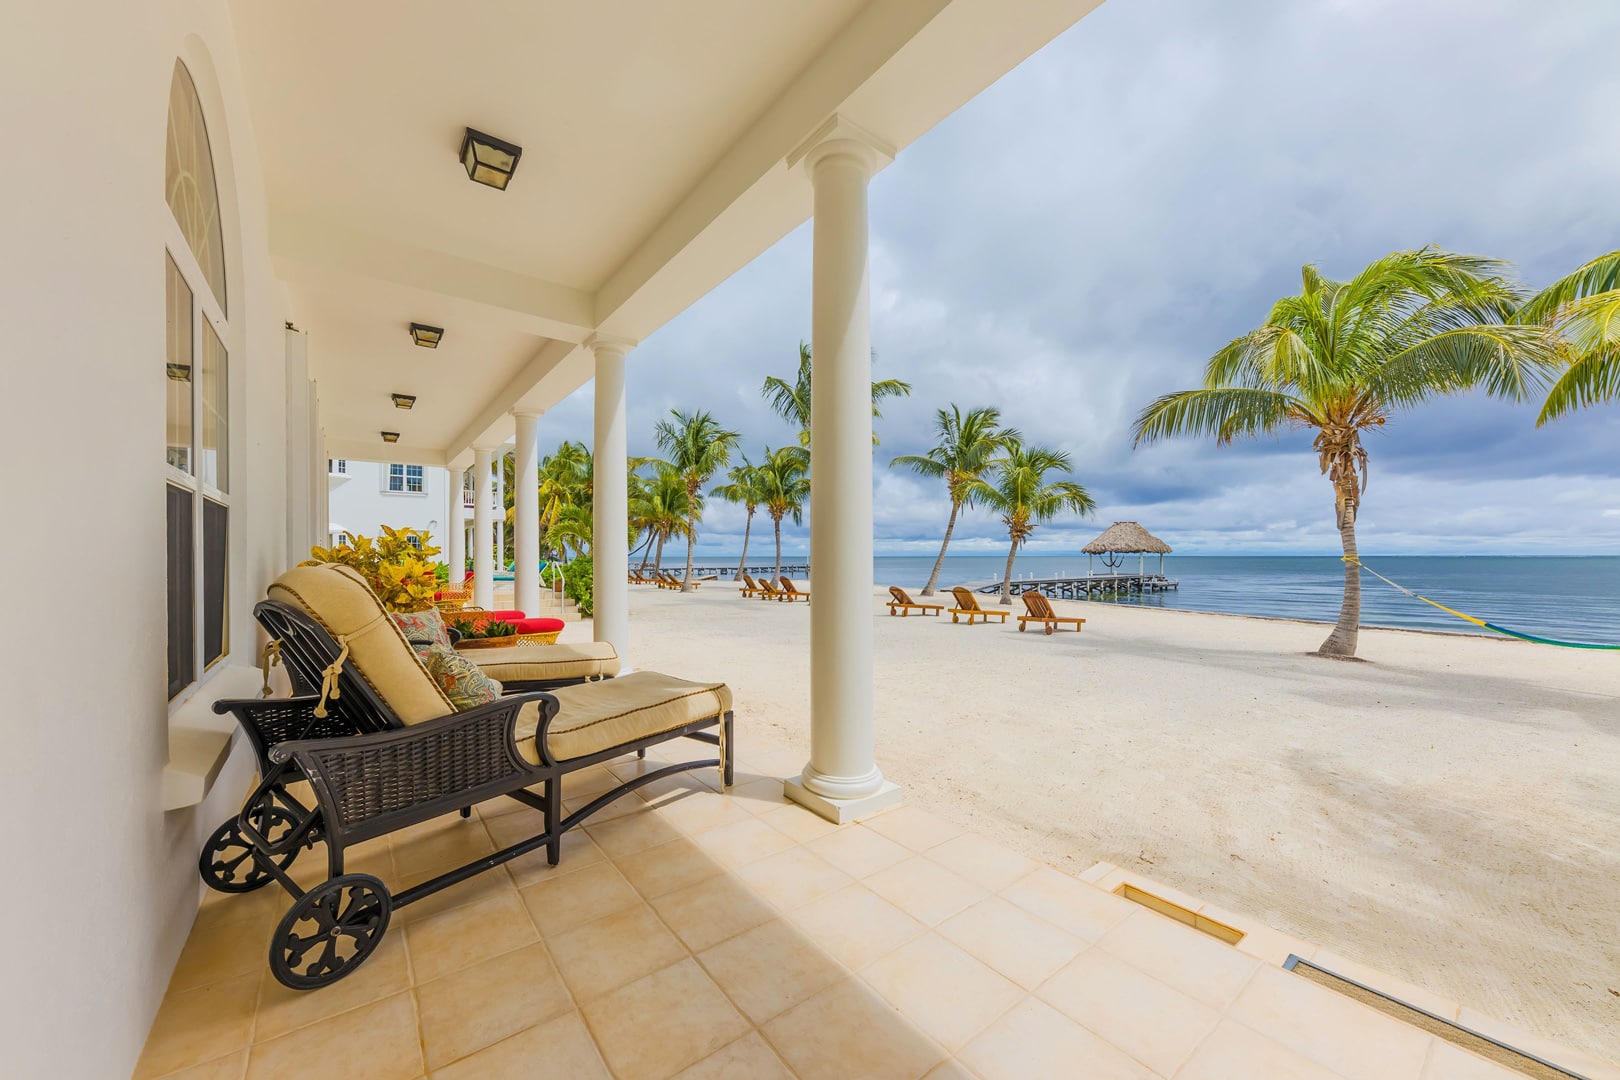 Convenient ground floor unit with direct access to the beach, allowing guests to step out and enjoy the sand, sea, and breathtaking views right from their doorstep.